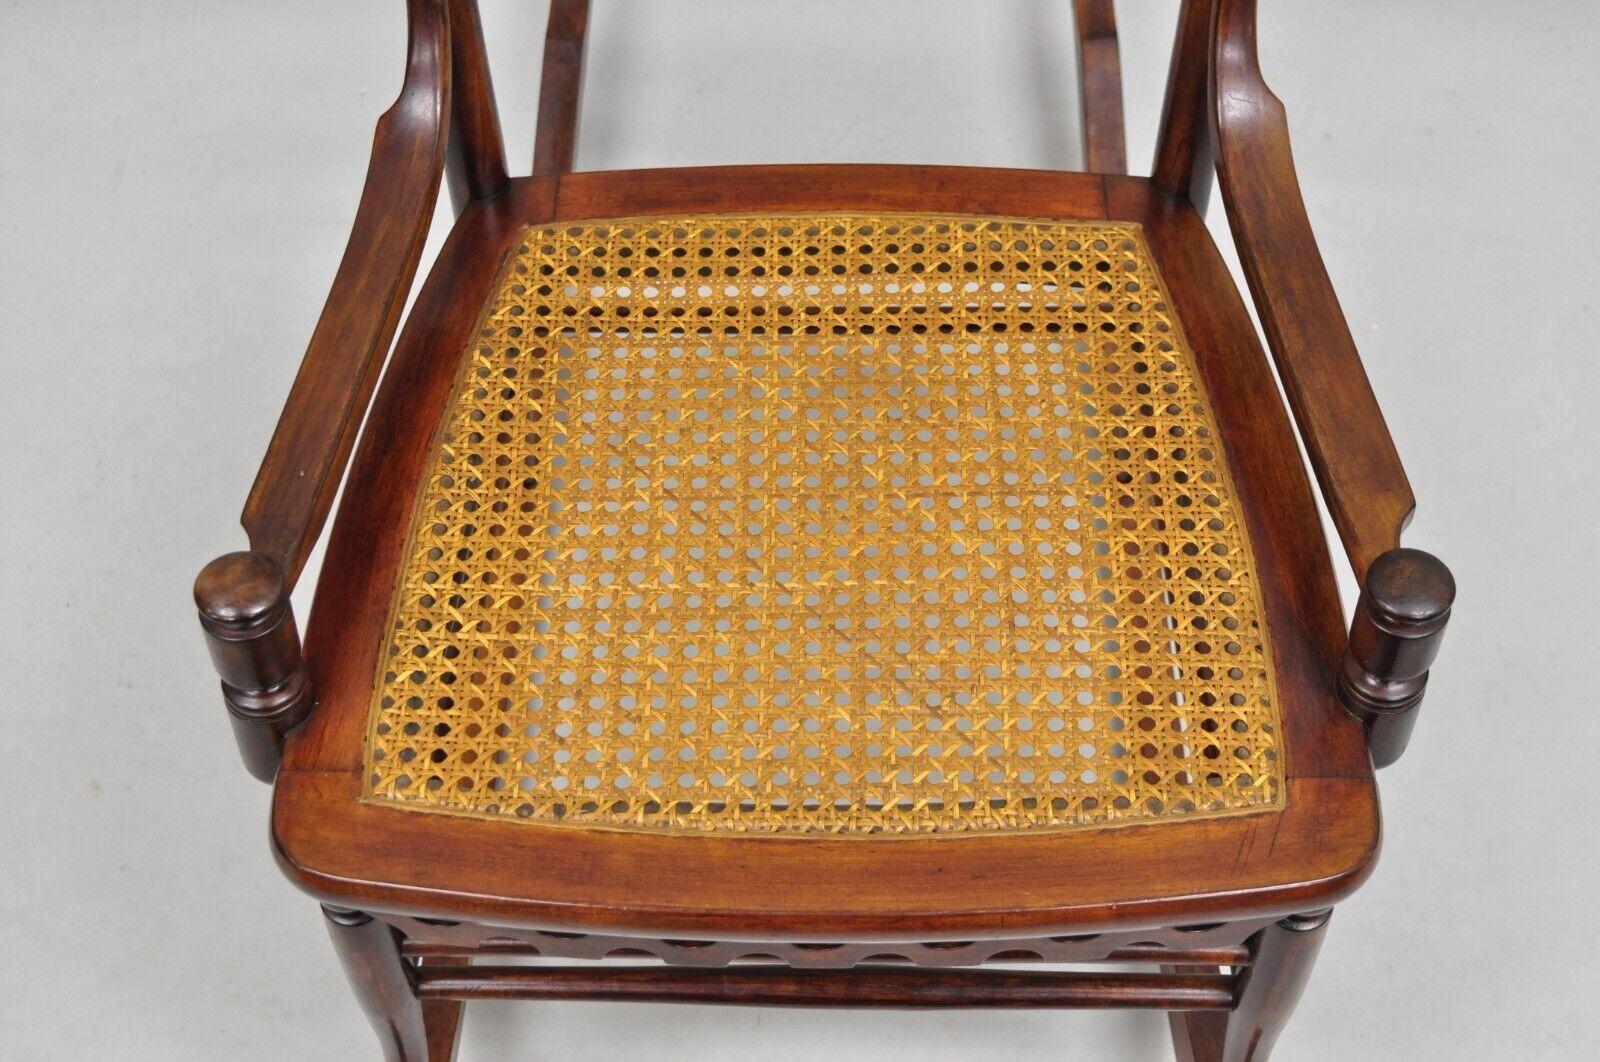 Victorian Aesthetic Movement Chestnut Stick & Ball Spindle Rocker Rocking Chair In Good Condition For Sale In Philadelphia, PA